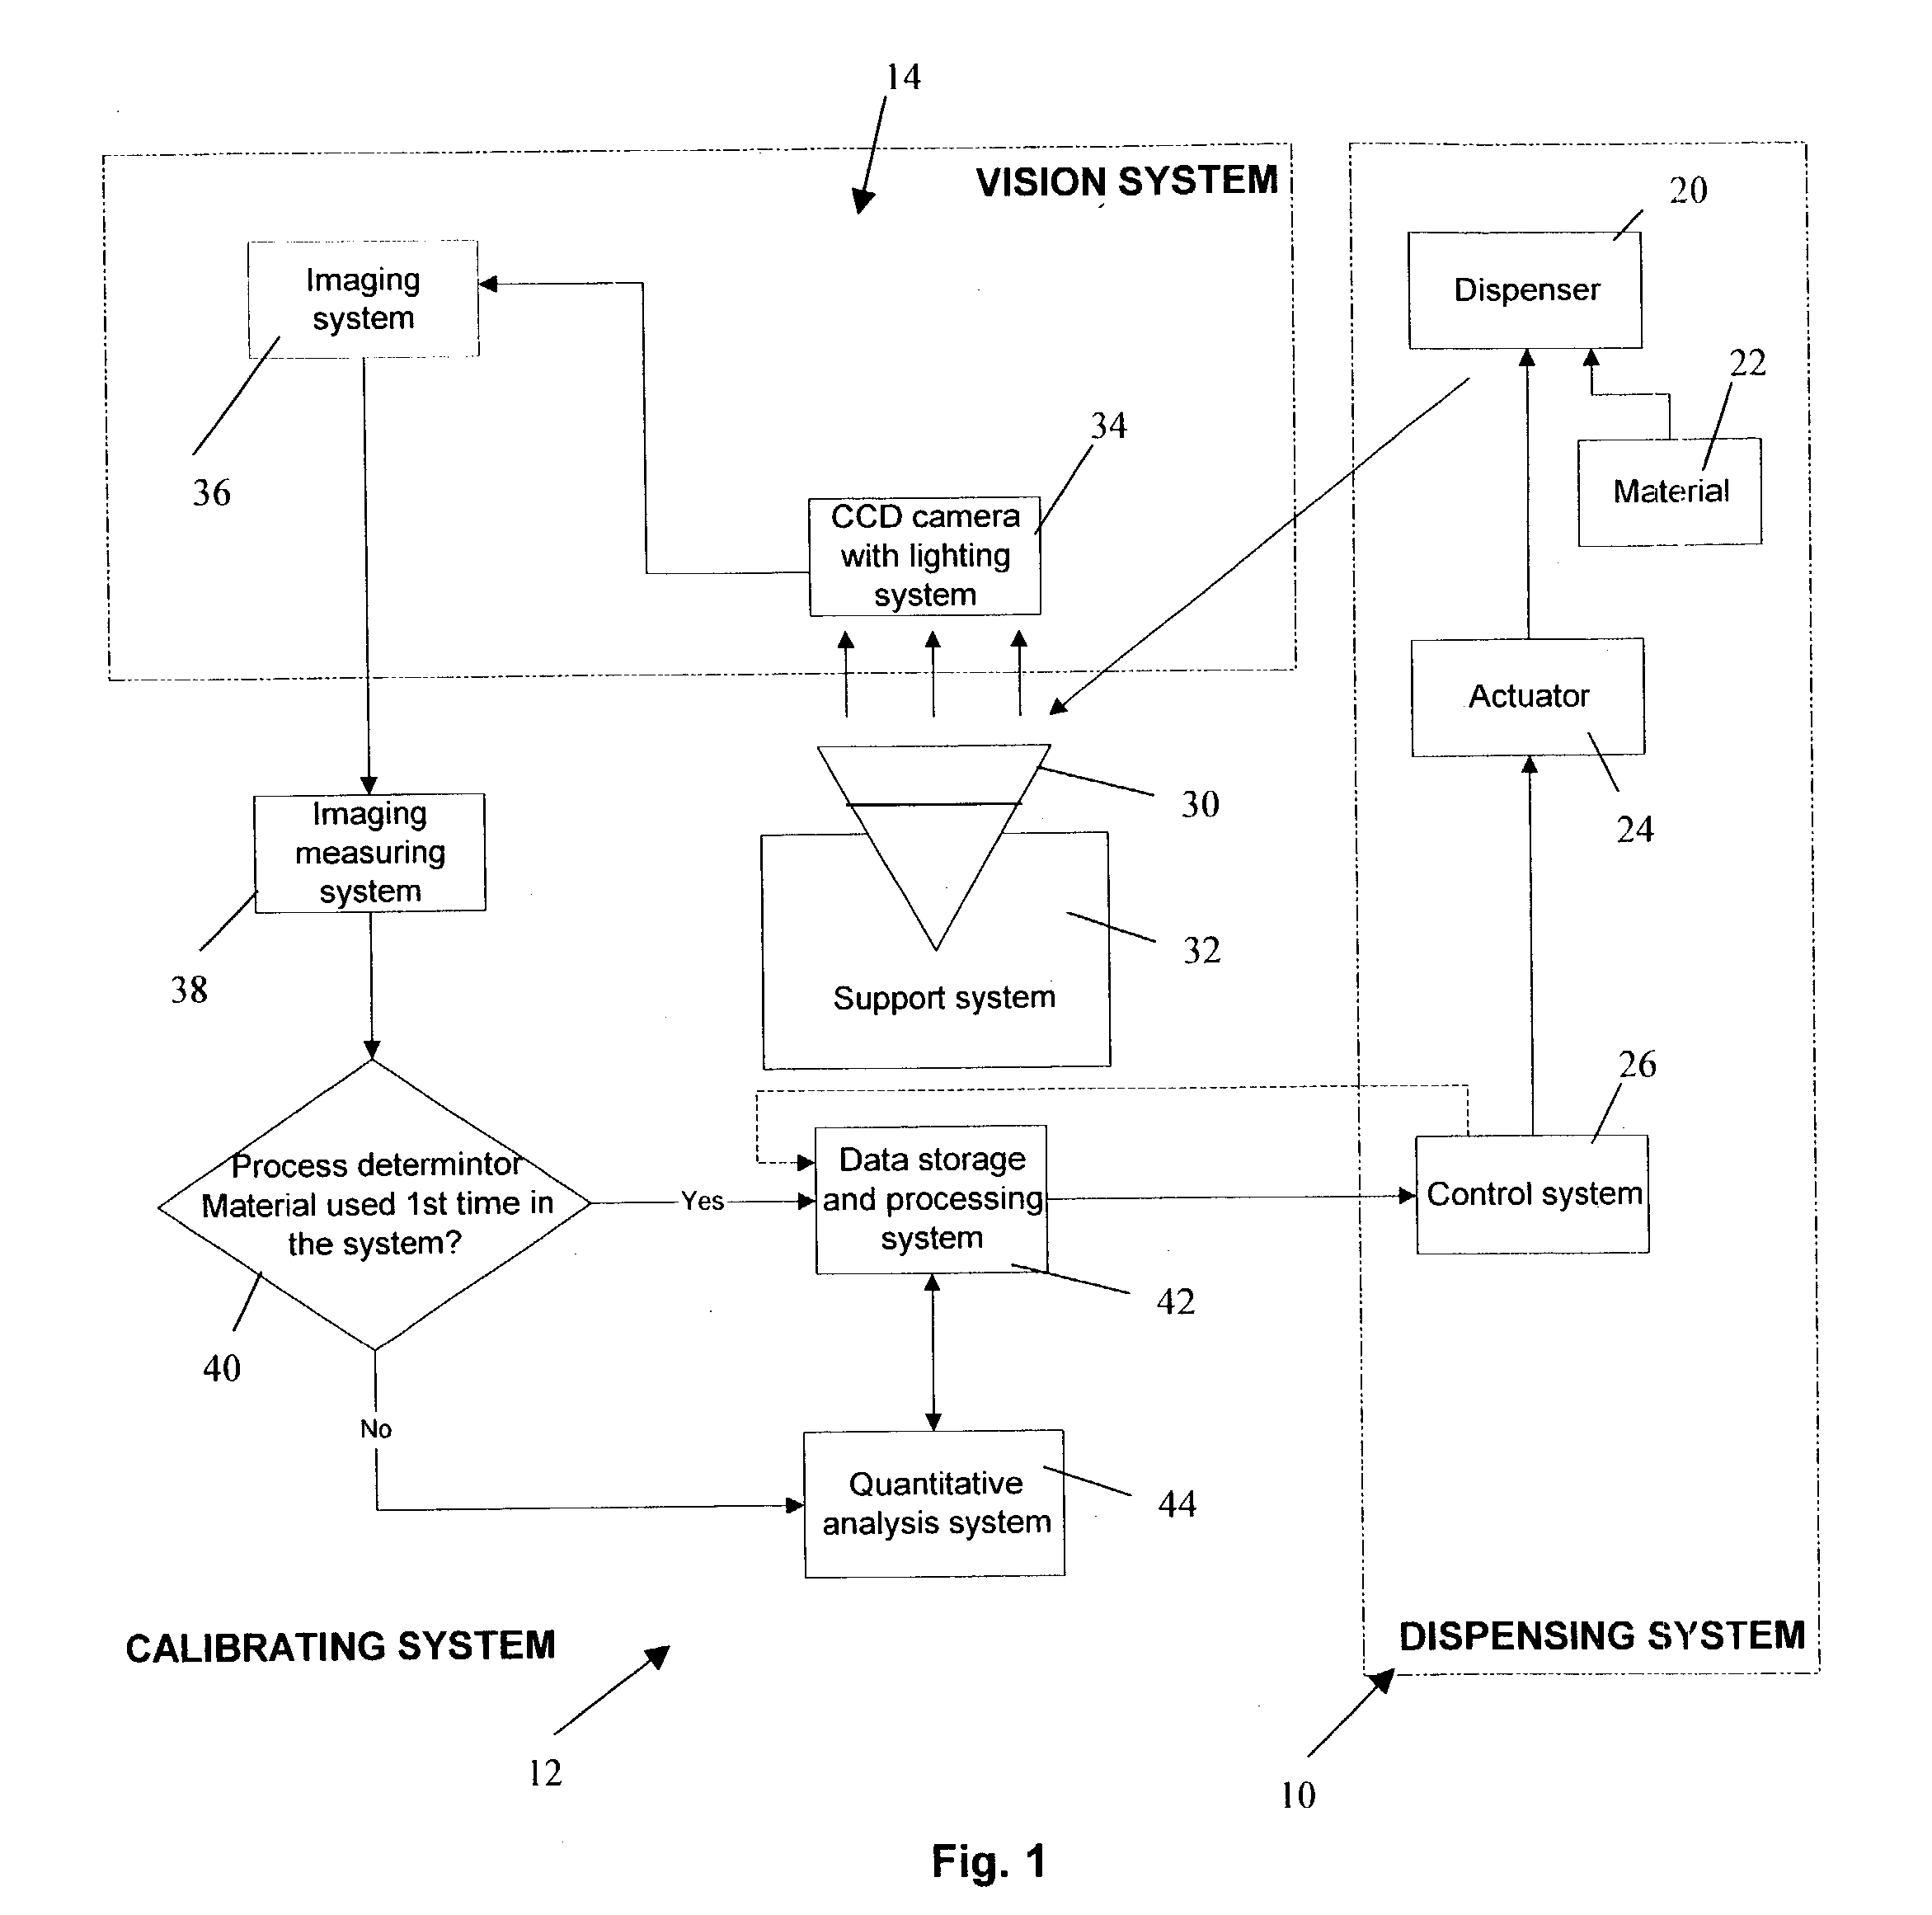 Apparatus and method for calibration of a dispensing system